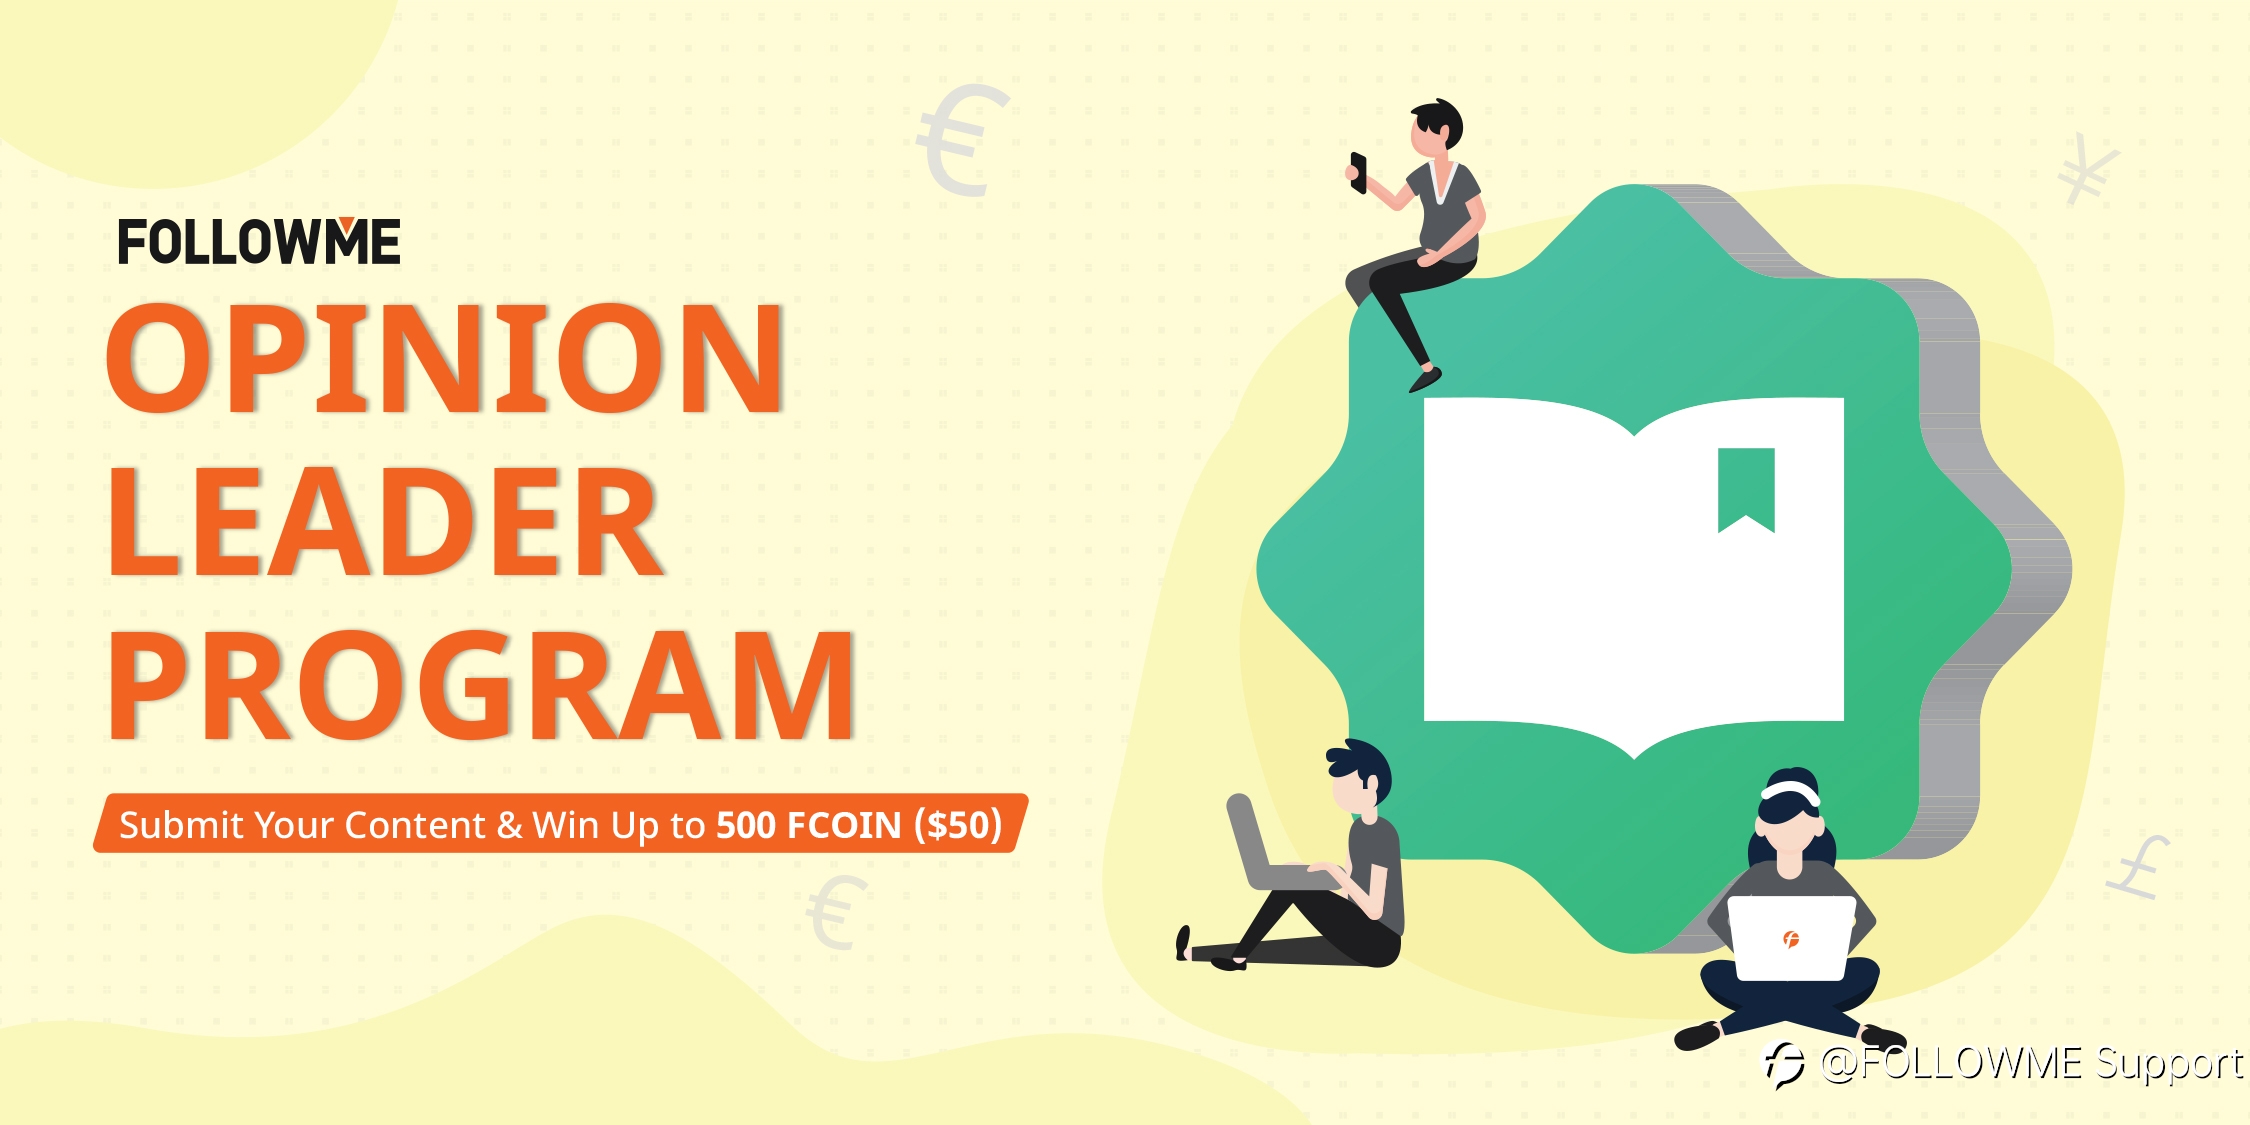 OPINION LEADER PROGRAM - WRITE & WIN UP TO 500 FCOIN!